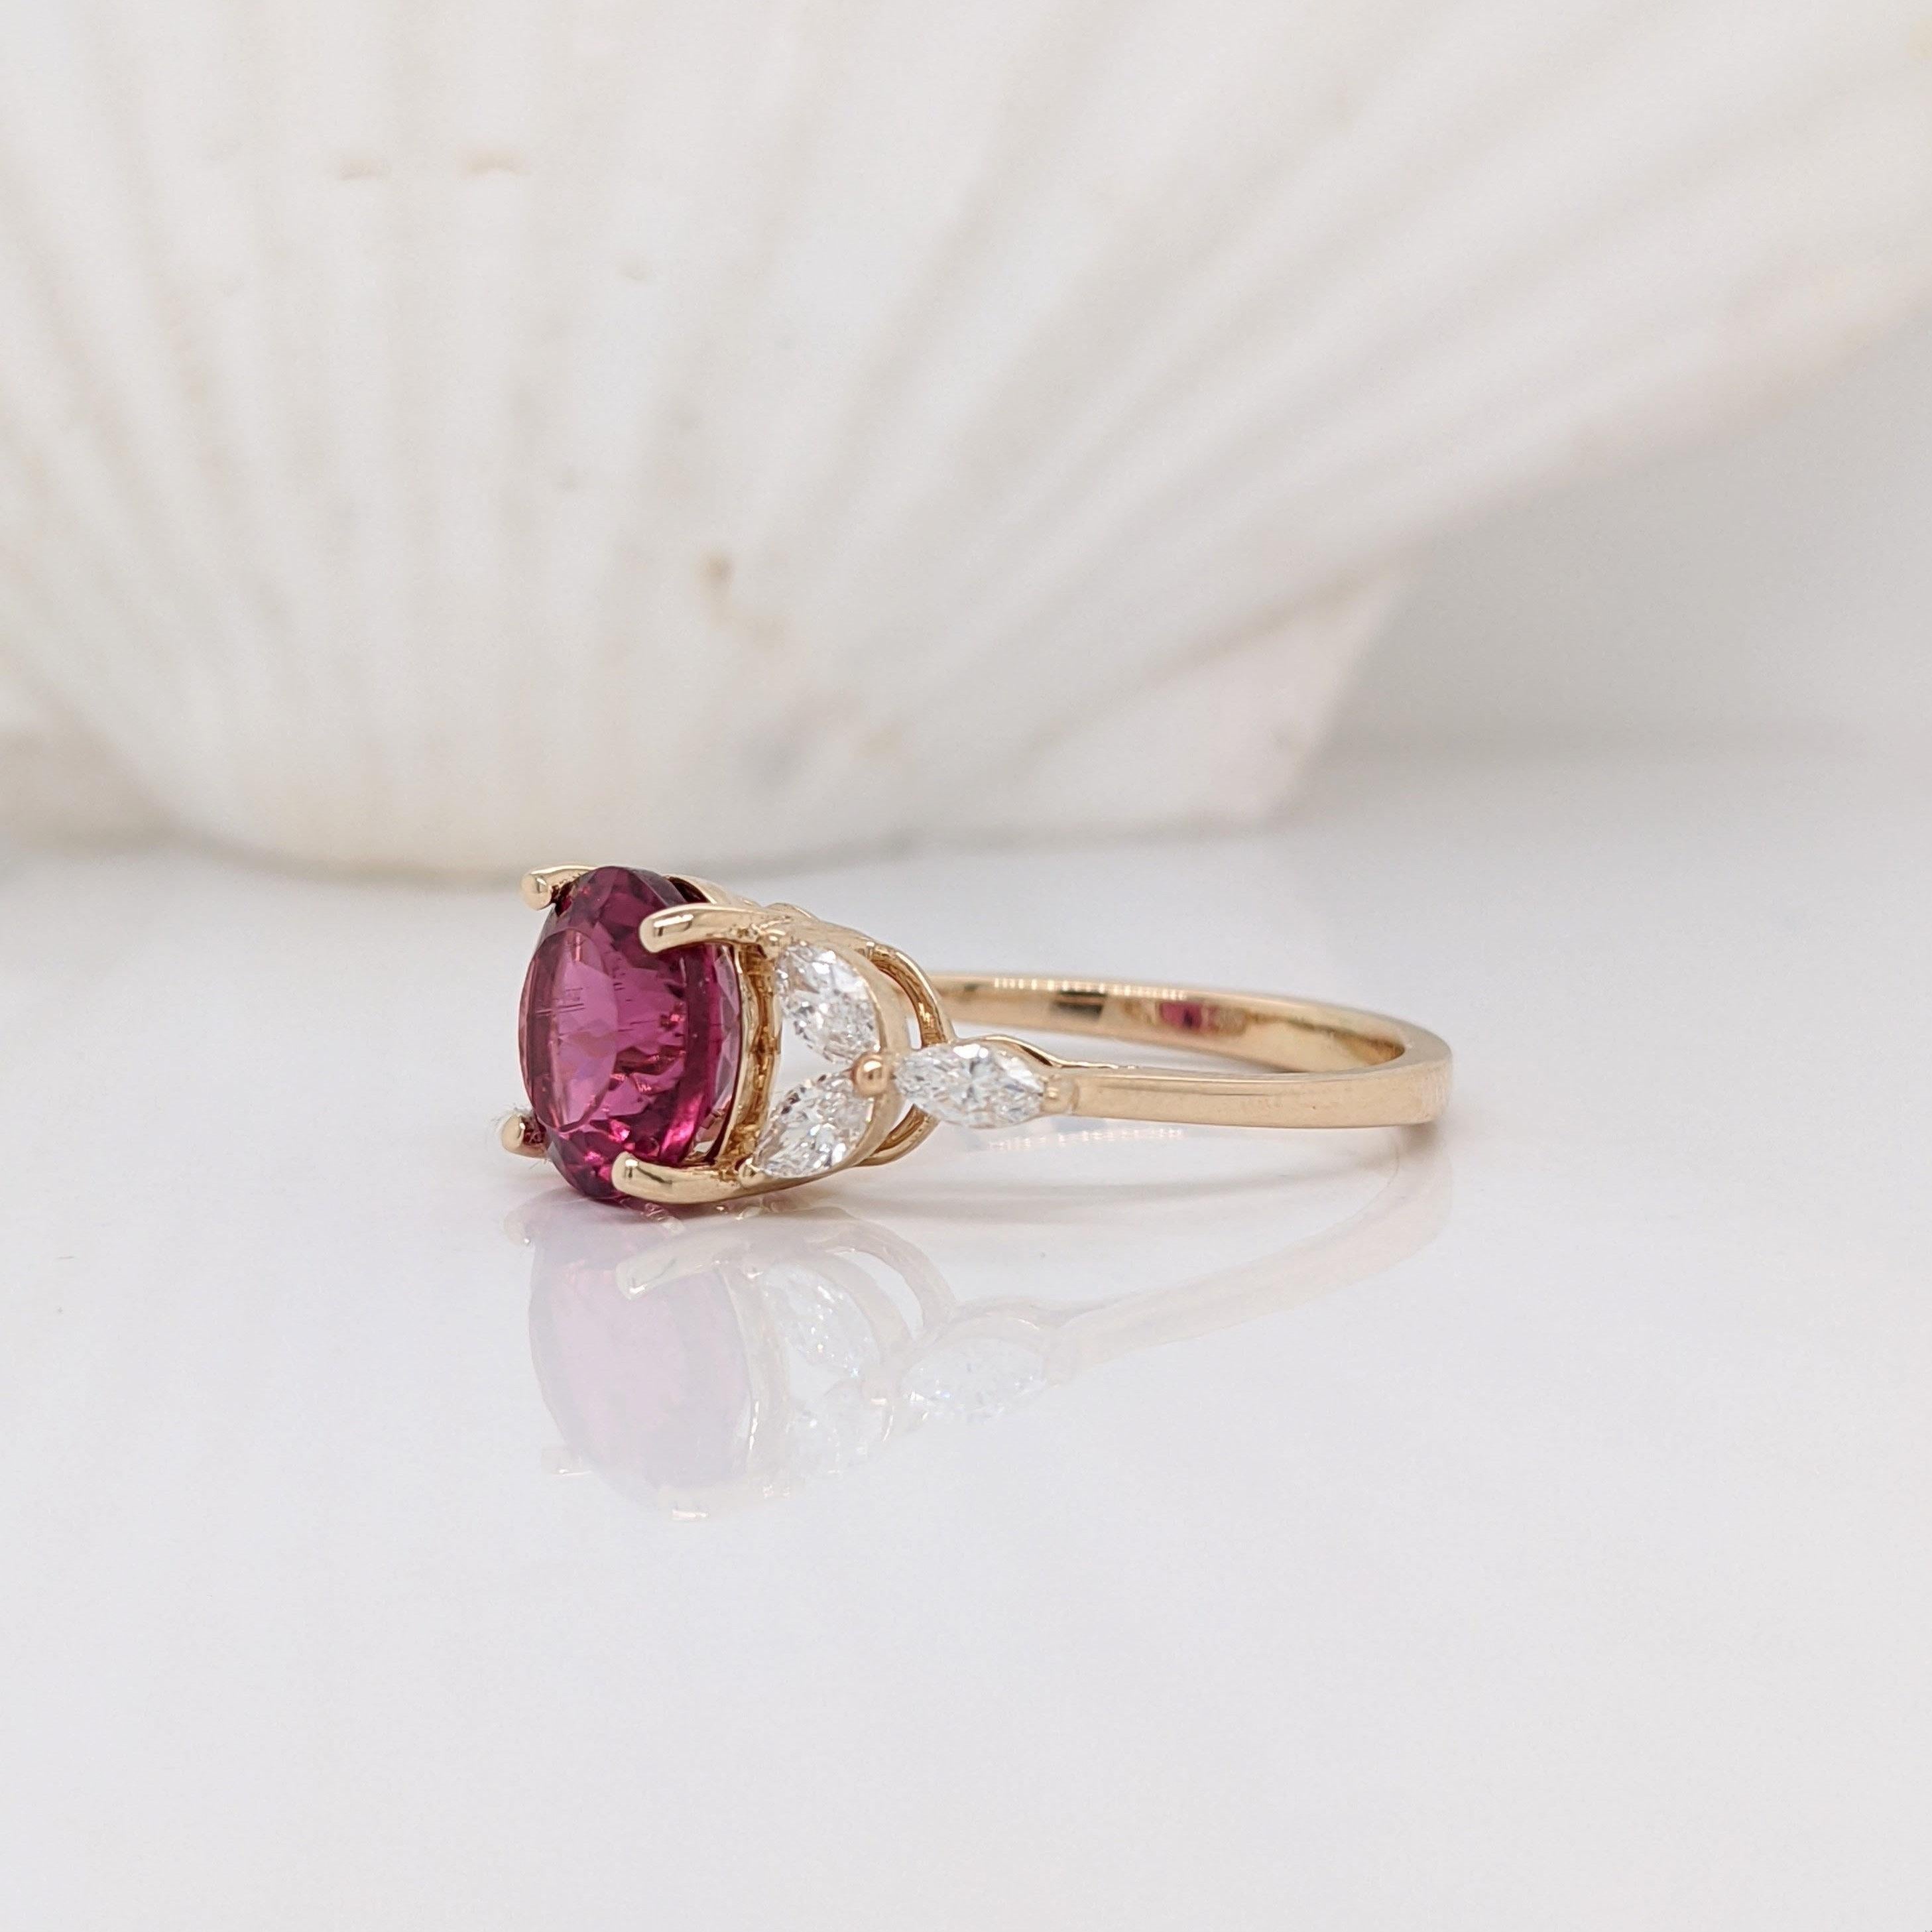 Bright and bold red-magenta Rubellite Tourmaline ring in 14k yellow gold. This stunning center stone is surrounded by marquis diamond accents giving it a floral look. A perfect ring for a unique bride. Perfect for special occasions such as